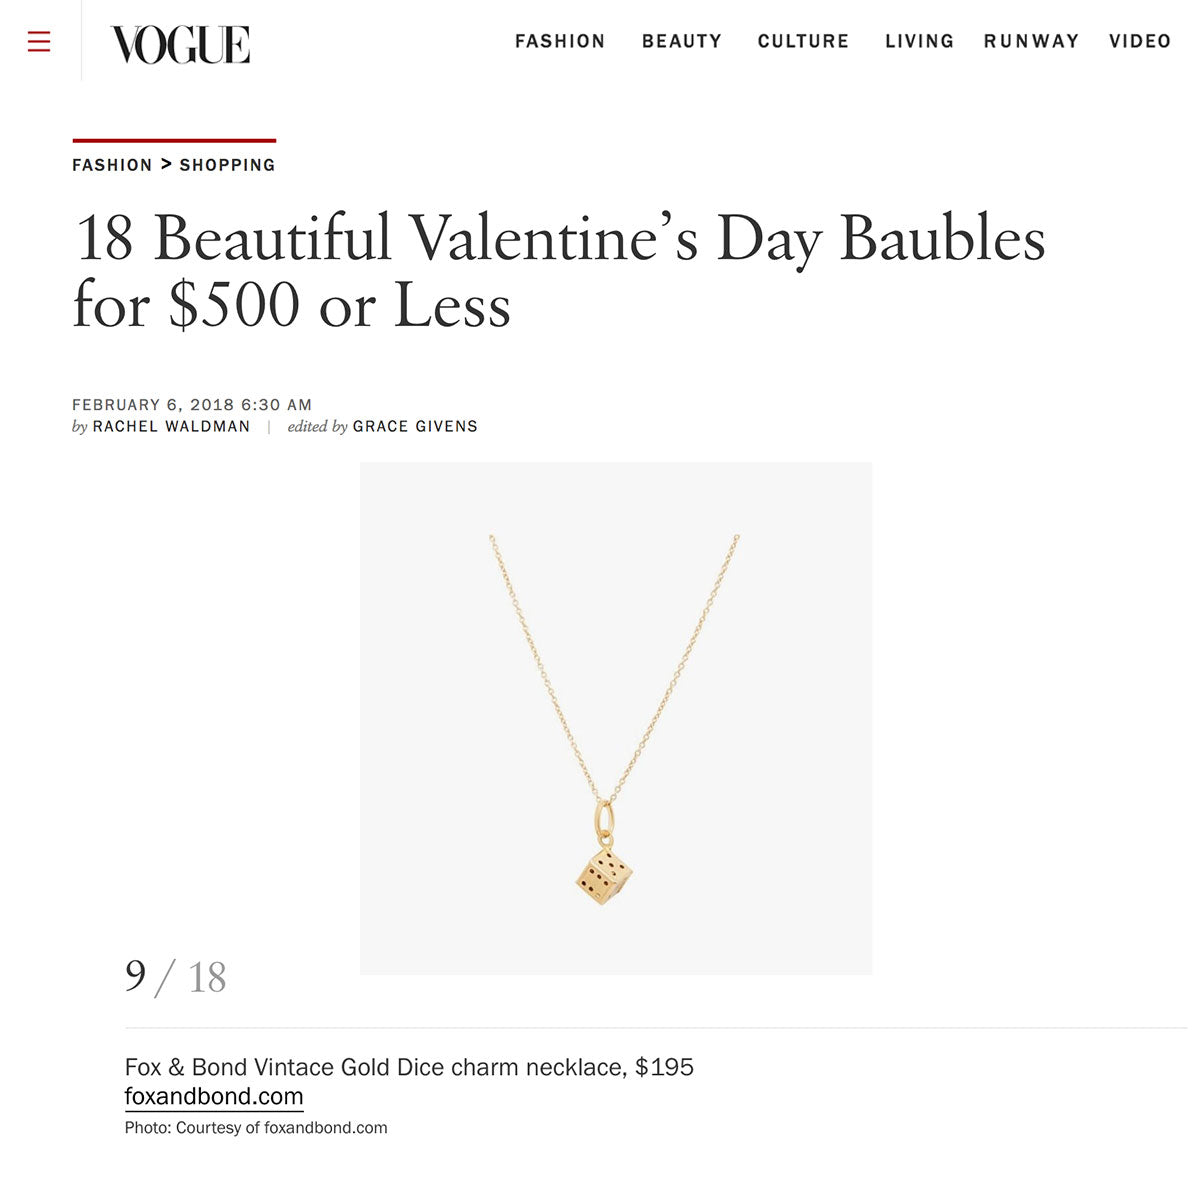 Vogue.com: 18 Beautiful Valentine’s Day Baubles for $500 or Less